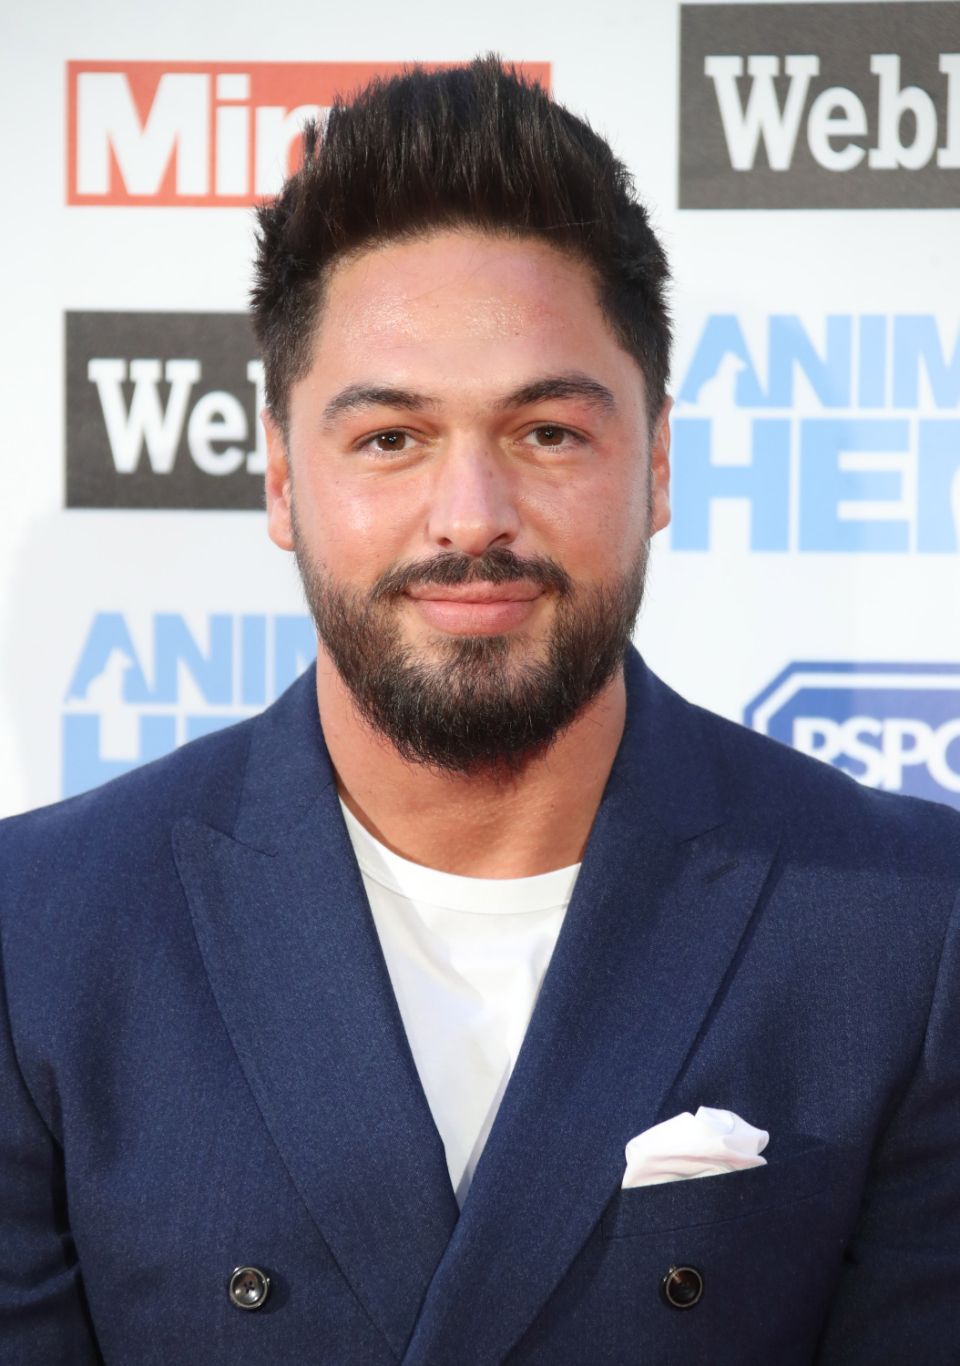 Mario Falcone attends the Daily Mirror & RSPCA Animal Hero awards at Grosvenor House on September 6, 2018 in London, England. (Photo by Mike Marsland/Mike Marsland/WireImage)